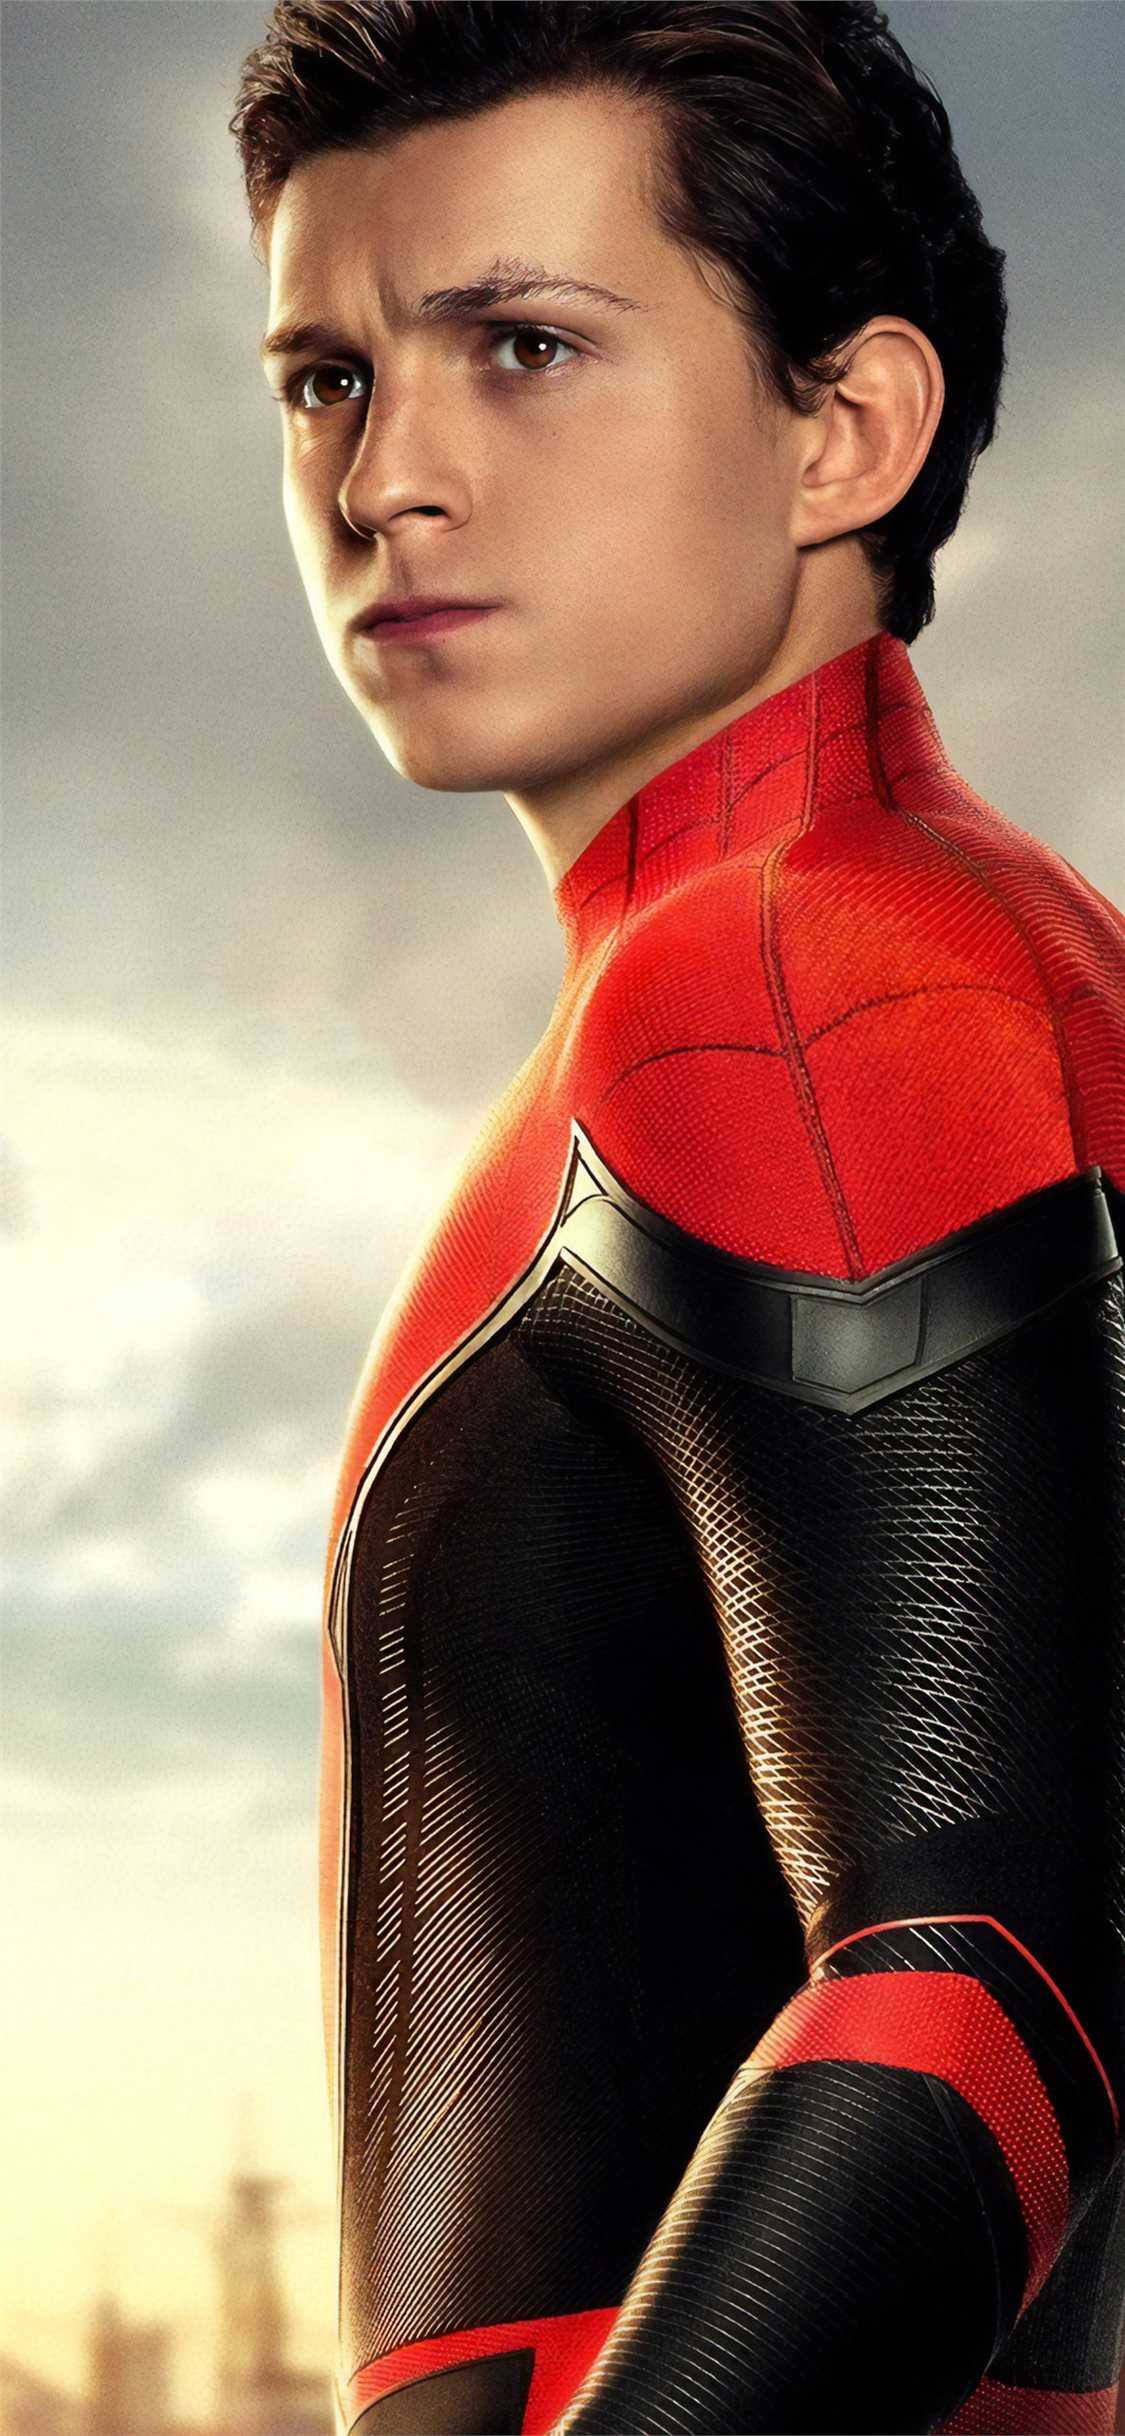 Tom Holland as Spiderman in the 2019 Spiderman movie - Tom Holland